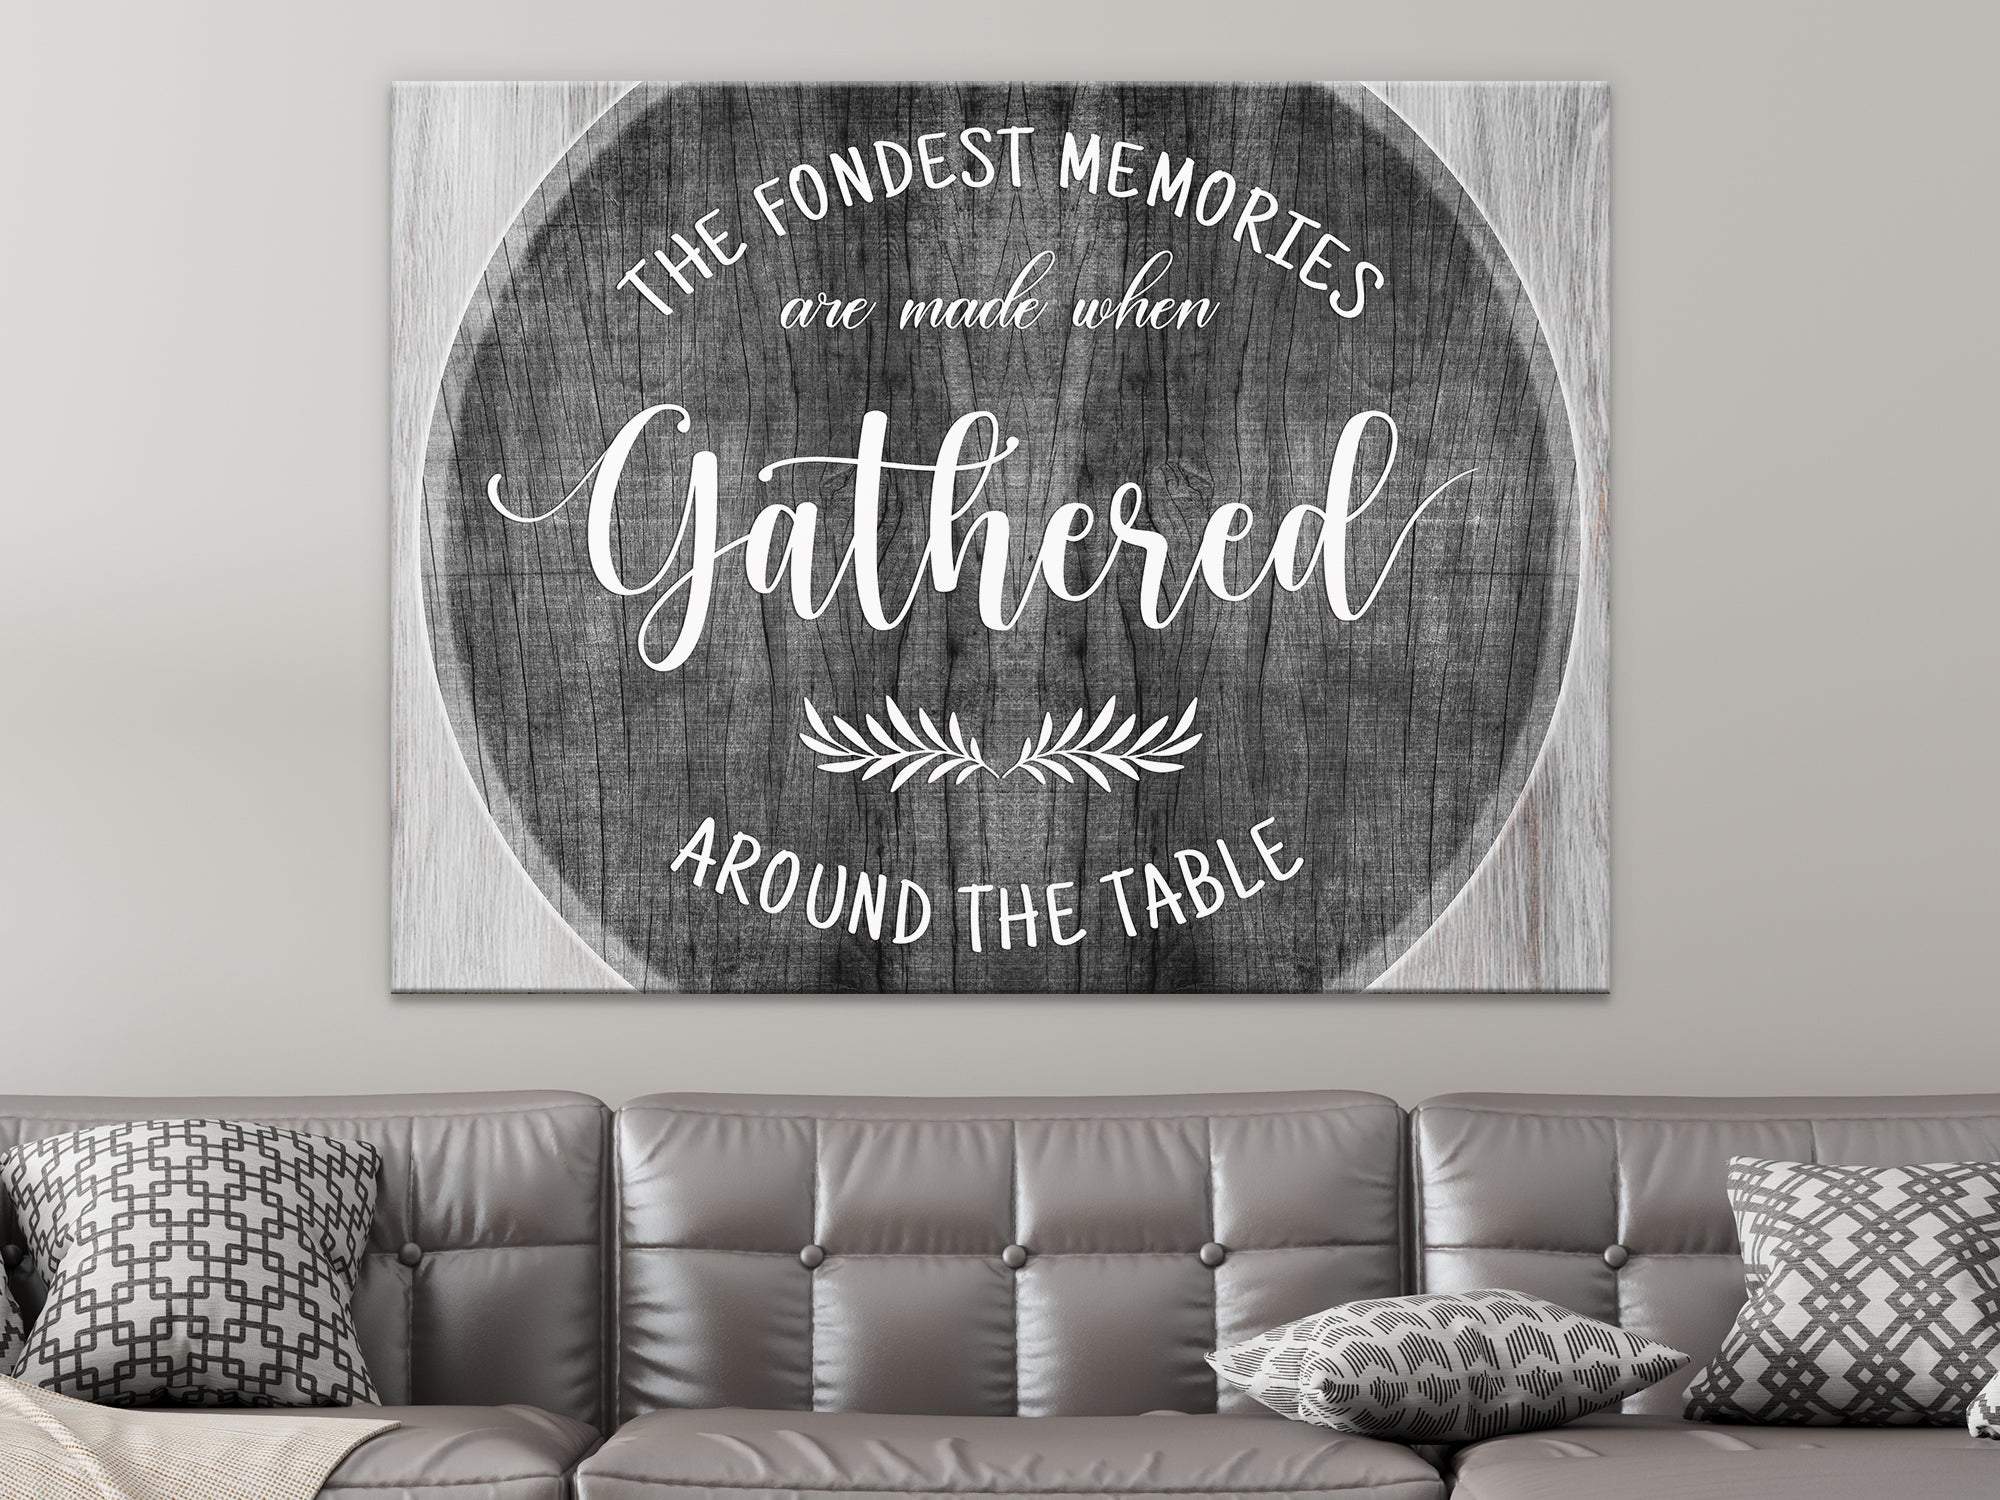 Fondest Memories Are Made When Gathered - Dinning Room - Canvas Wall Art